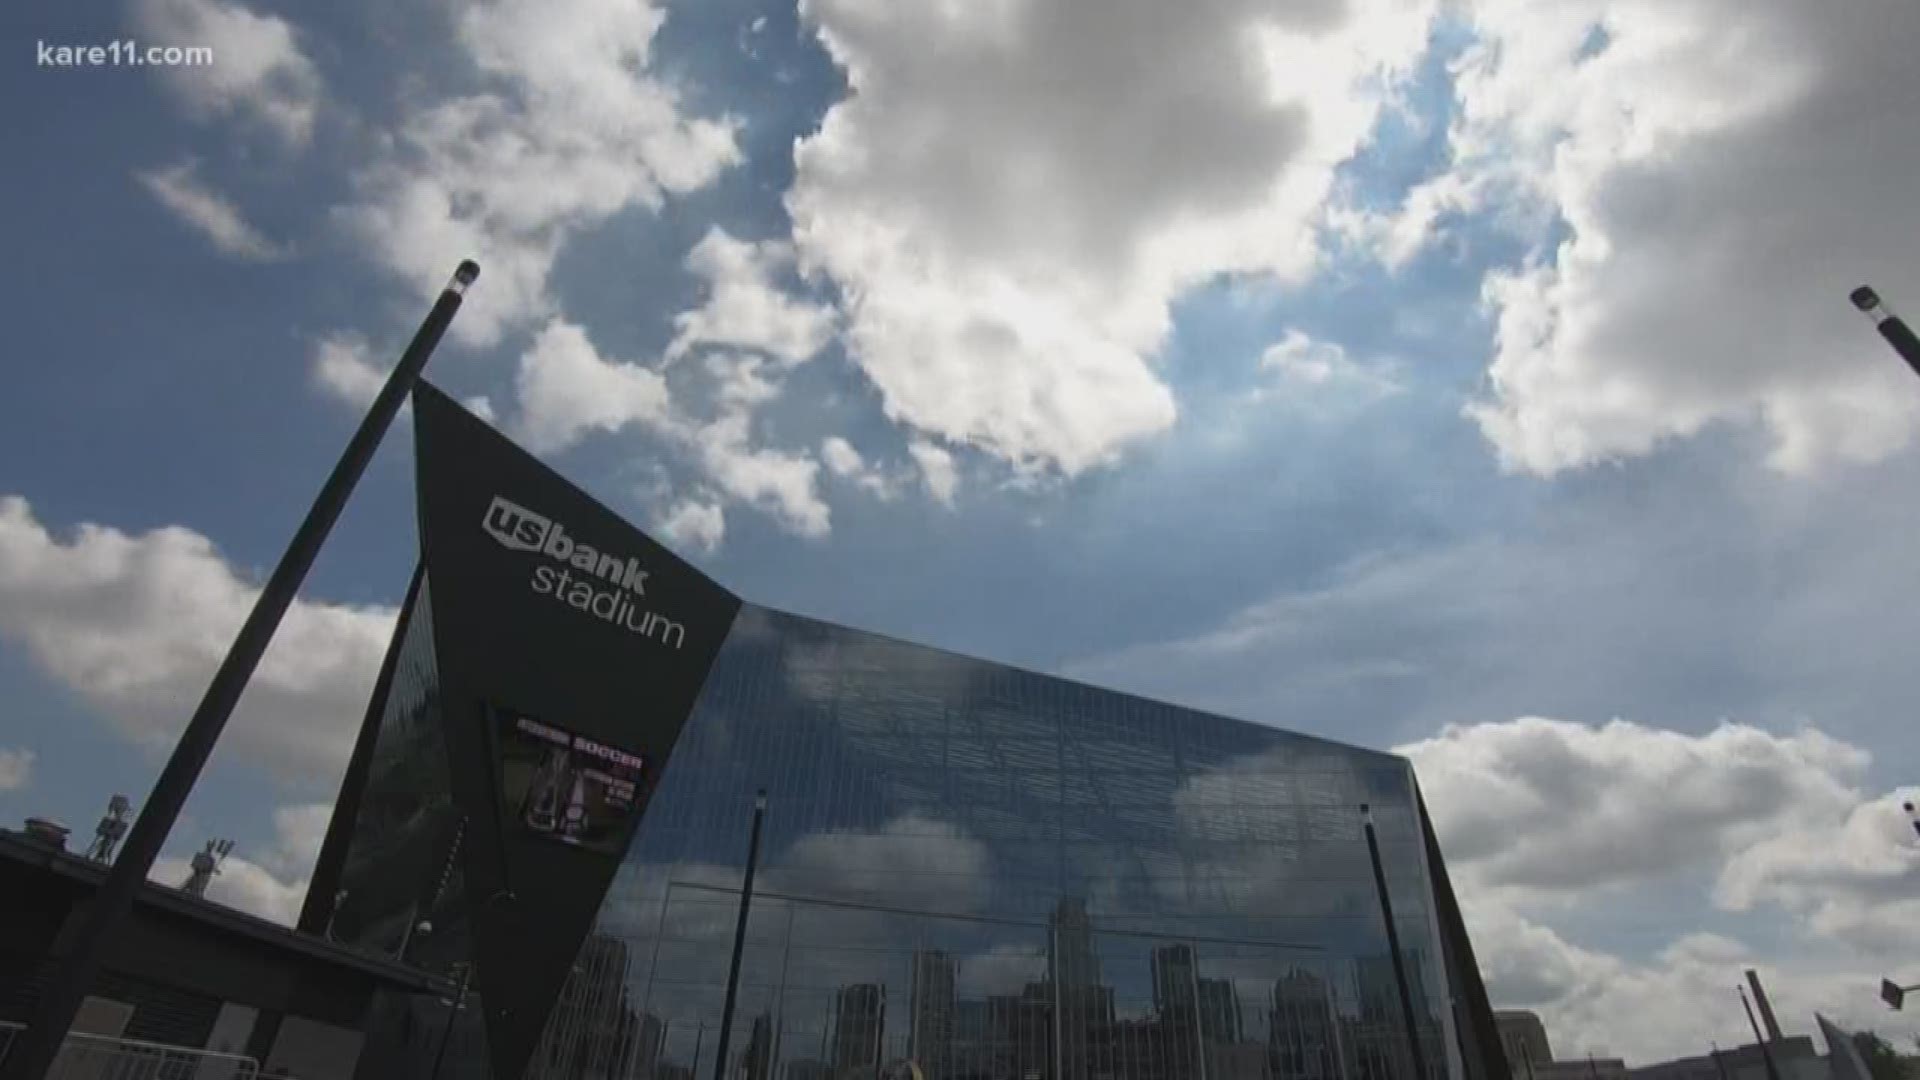 US Bank Stadium is known for its massive windows and translucent roof, but the Metropolitan Sports Facilities Authority is now prepared to spend more than $5 million to cover them all up. https://kare11.tv/2MvmO7n